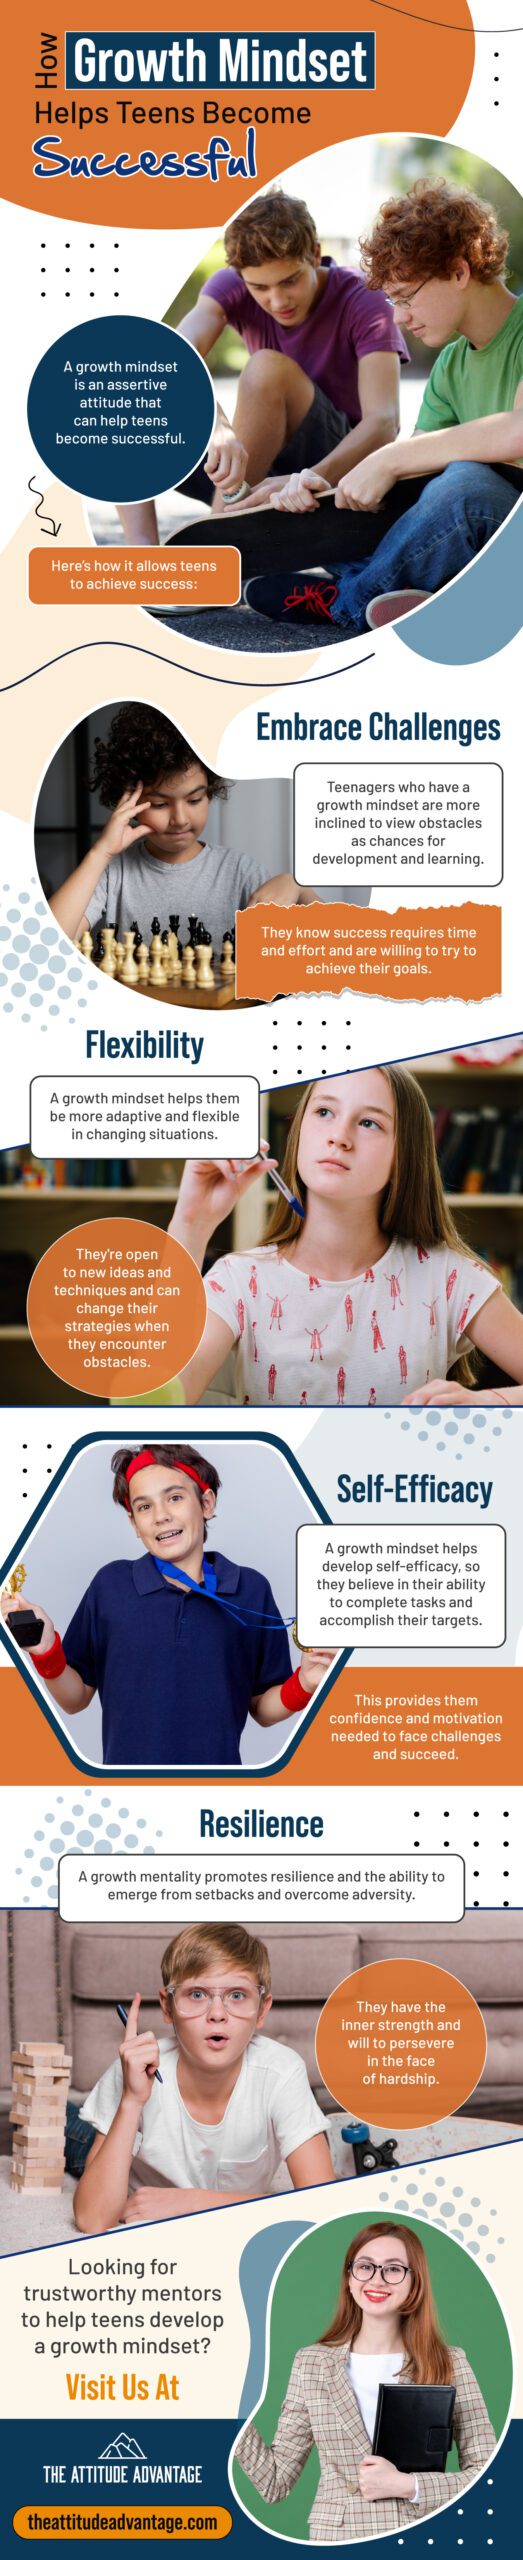 How Growth Mindset Helps Teens Become Successful | Infograph